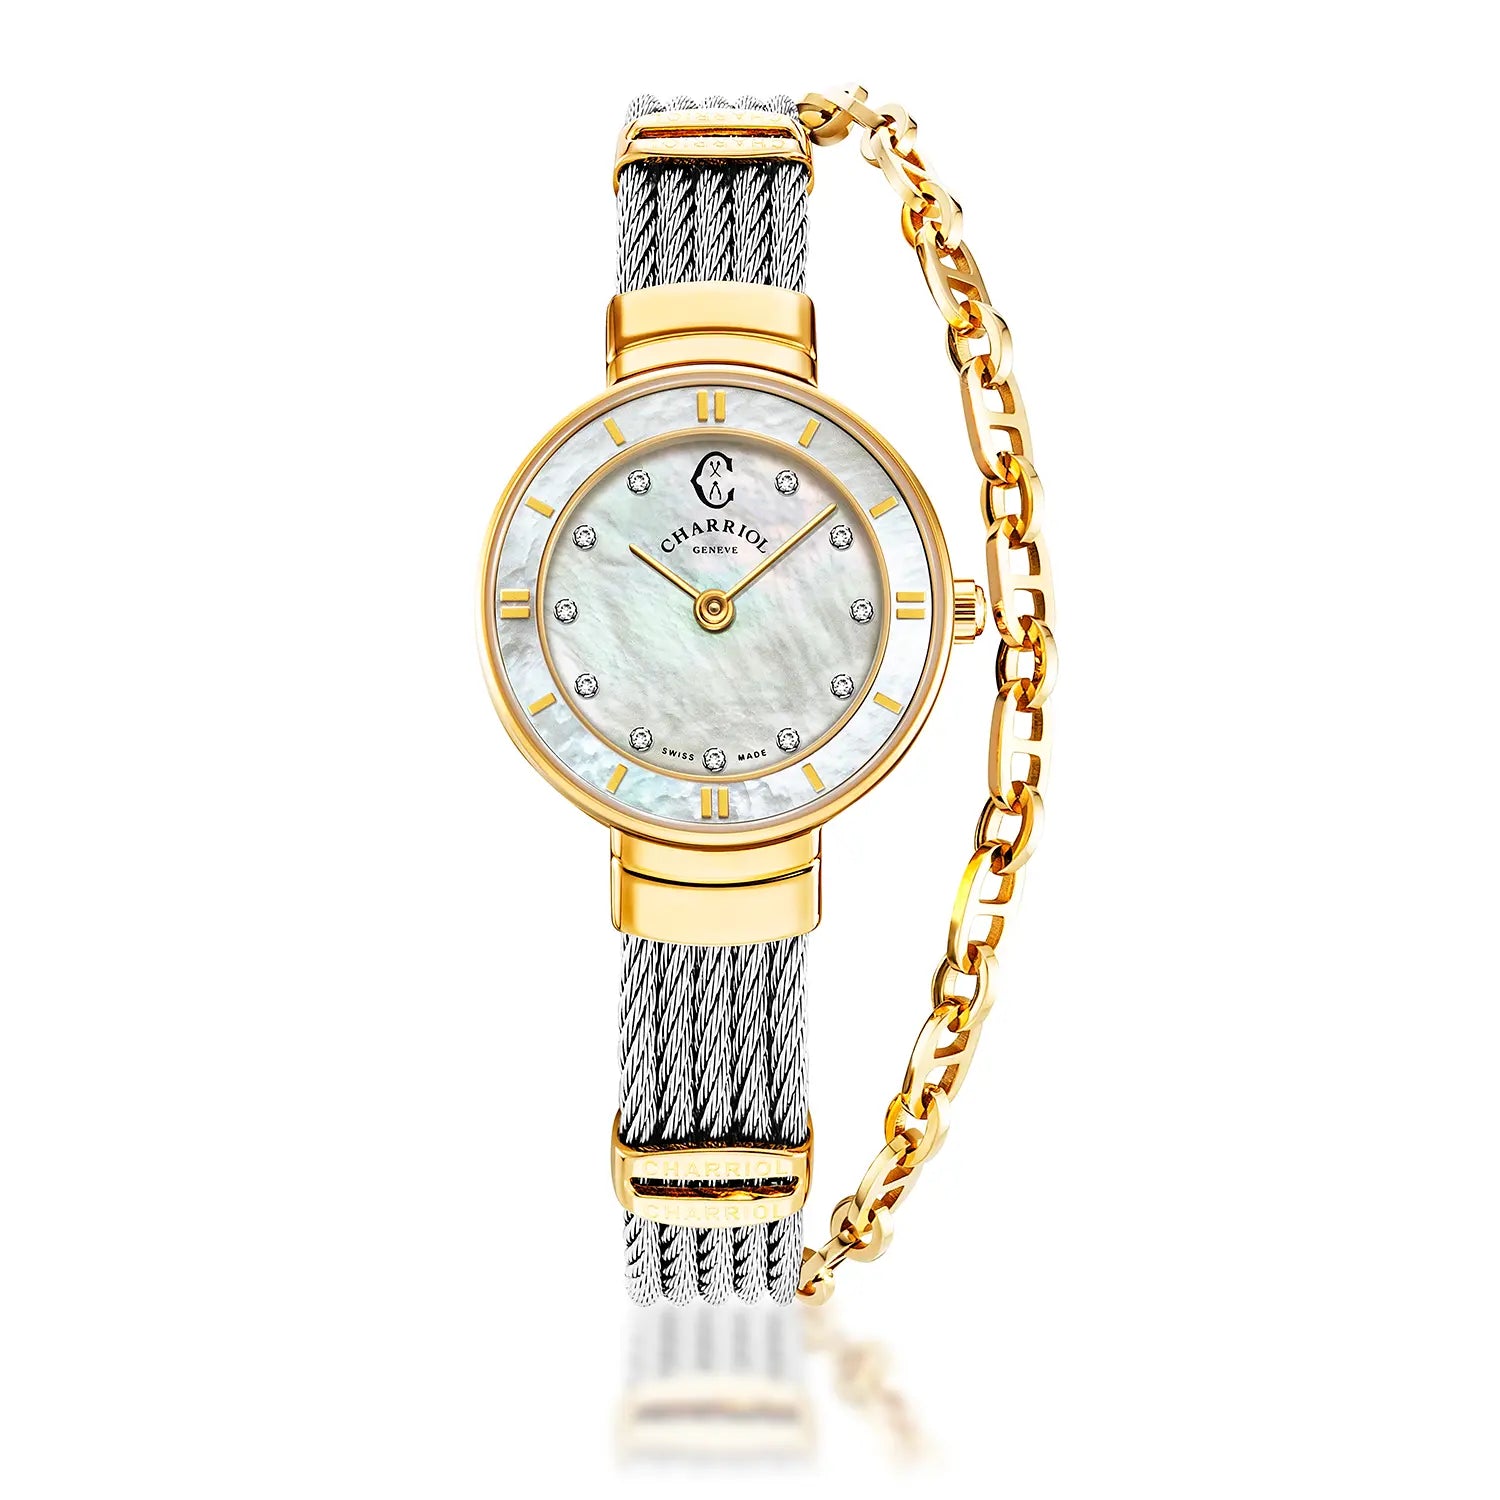 ST TROPEZ, 25MM, QUARTZ CALIBRE, MOTHER-OF-PEARL WITH 11 DIAMONDS DIAL, YELLOW GOLD PVD BEZEL, STEEL CABLE BRACELET - Charriol Geneve -  Watch